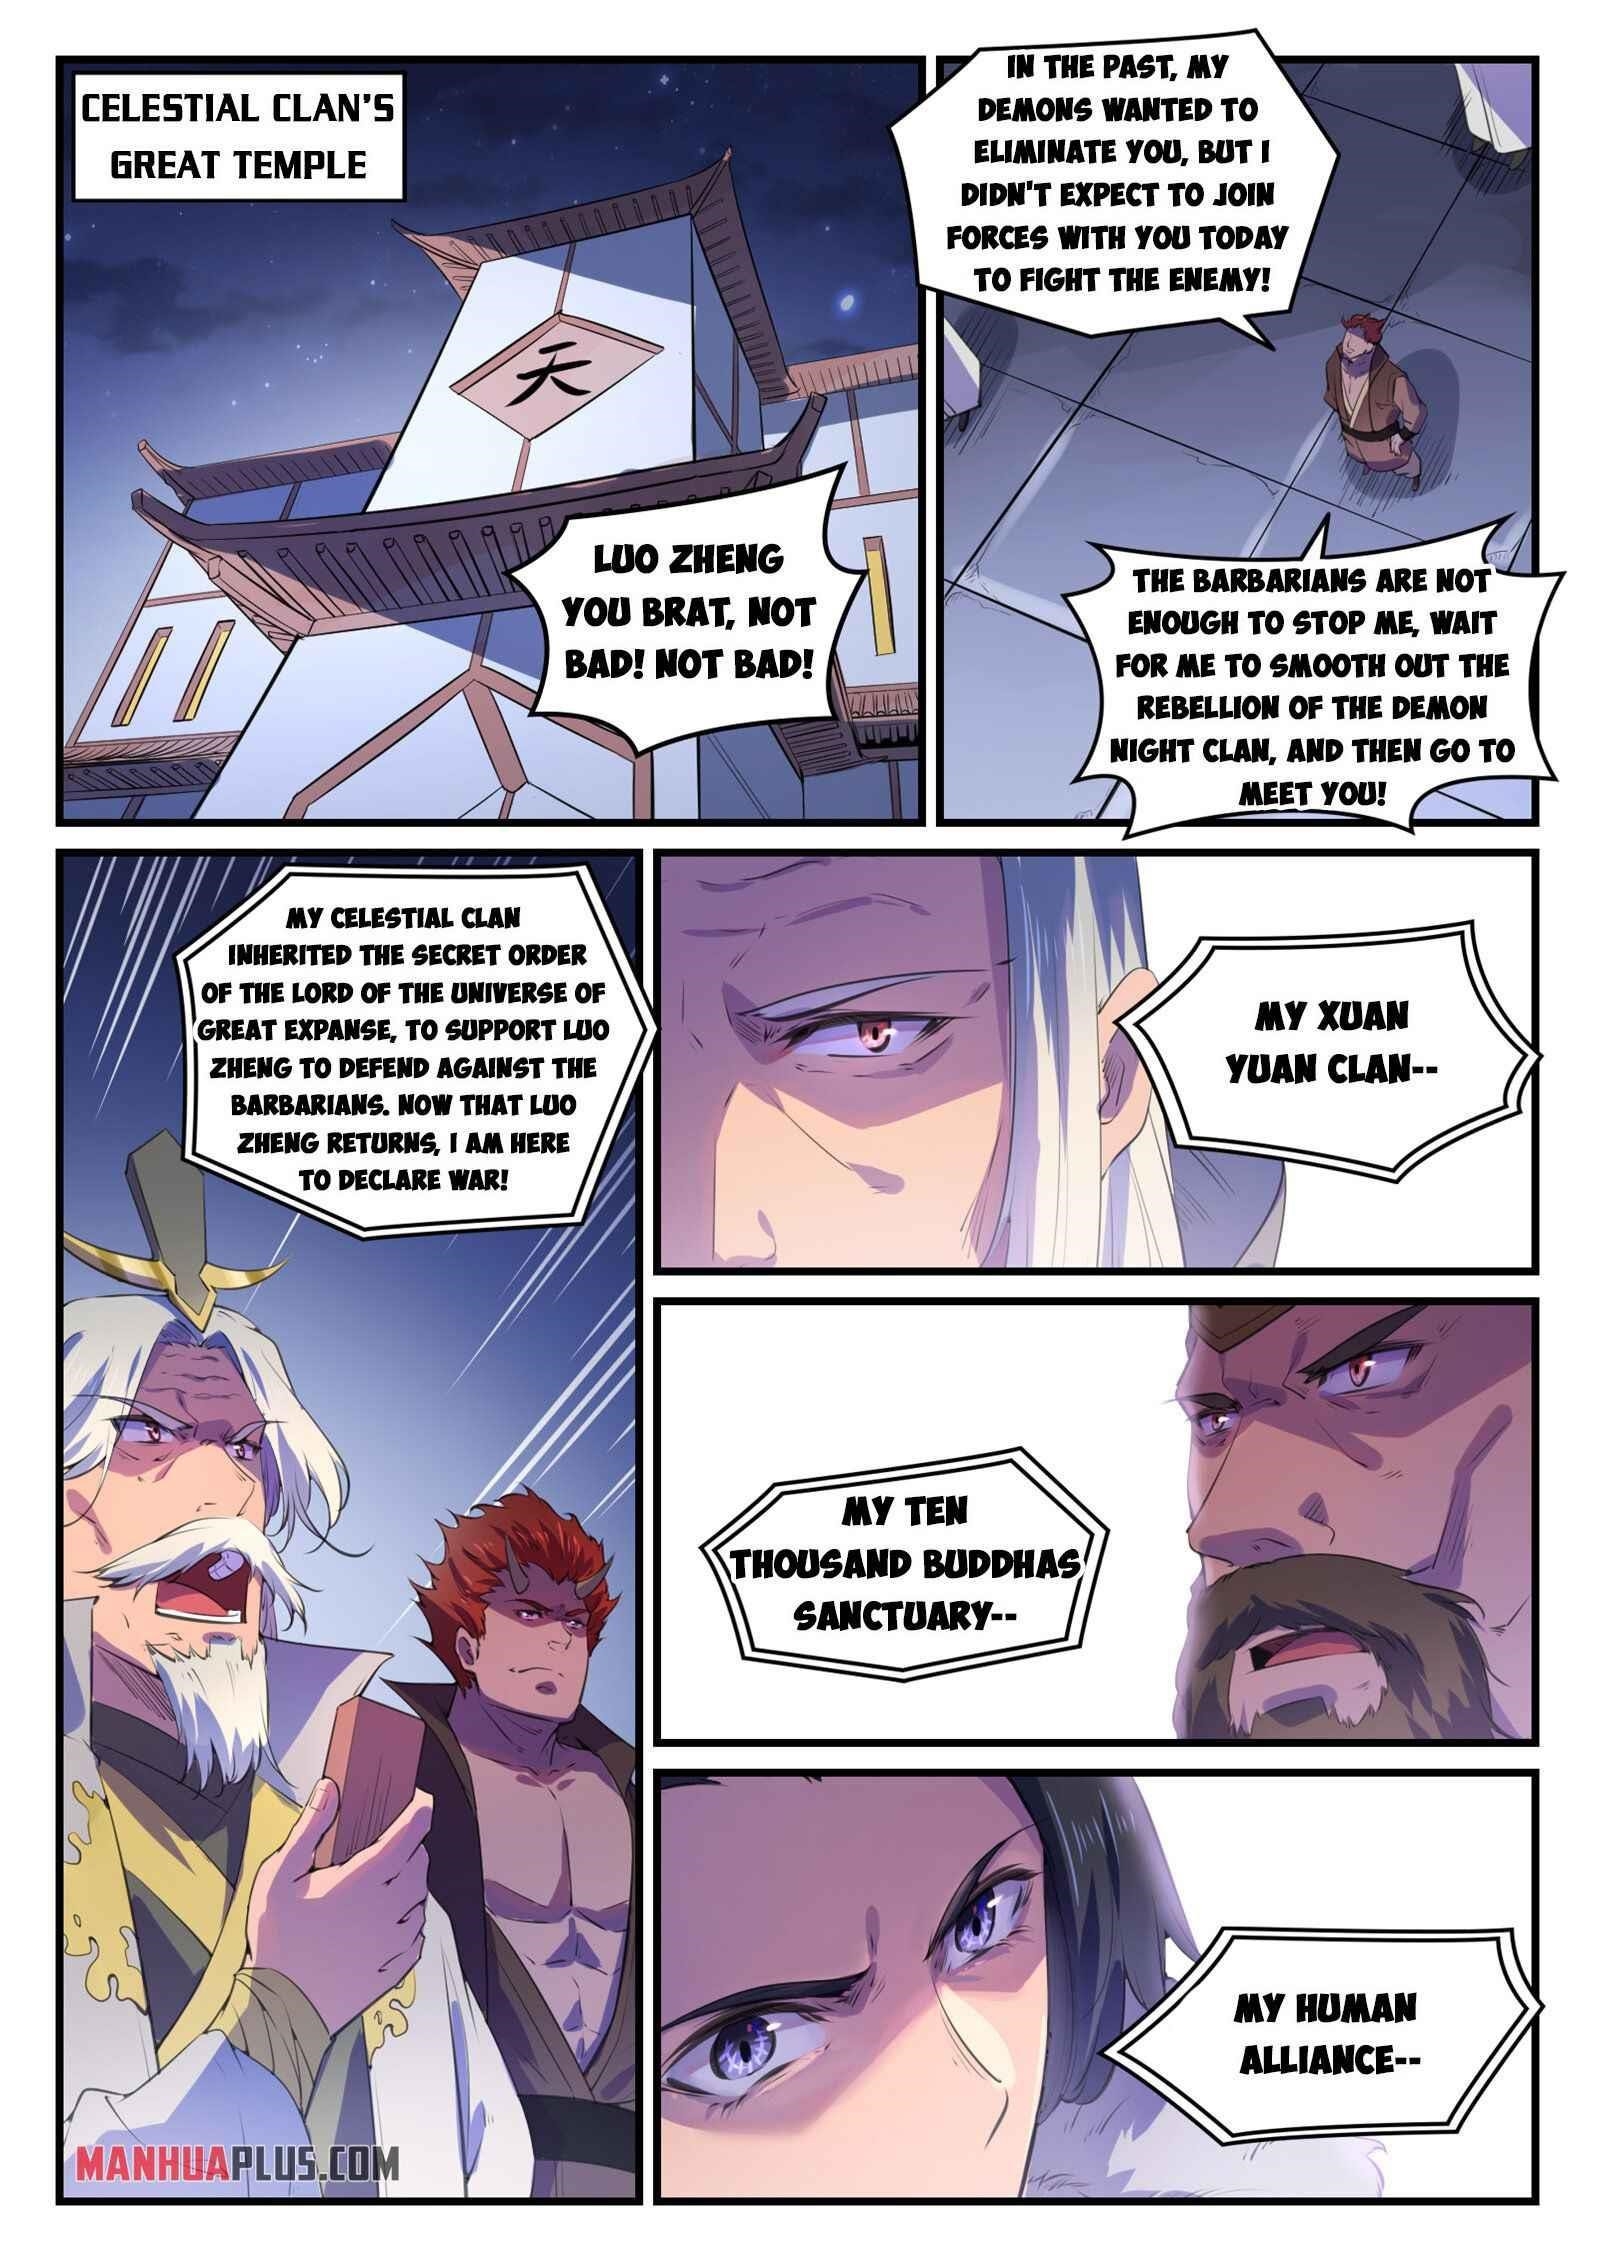 APOTHEOSIS Chapter 779 - Page 4